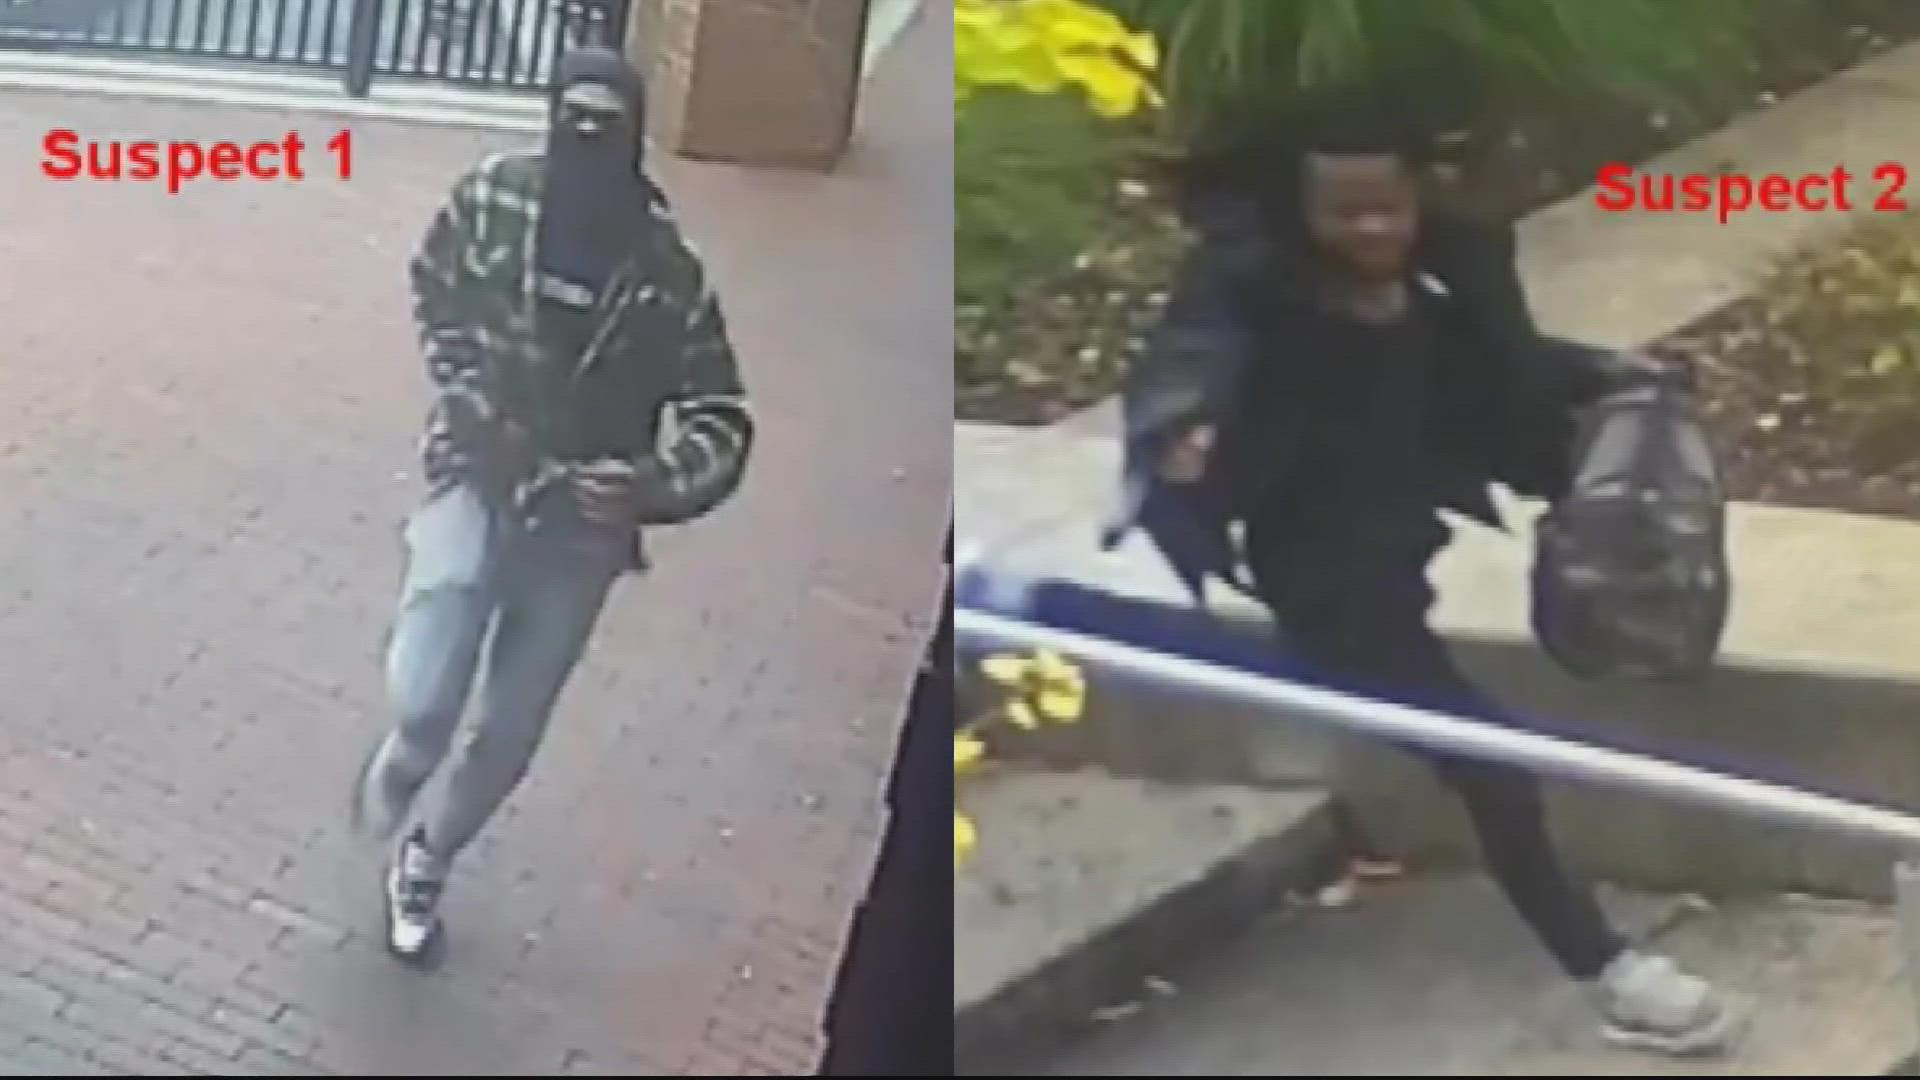 Police are asking for the public's help in identifying two people they say are responsible for a shooting in downtown Silver Spring Monday morning.